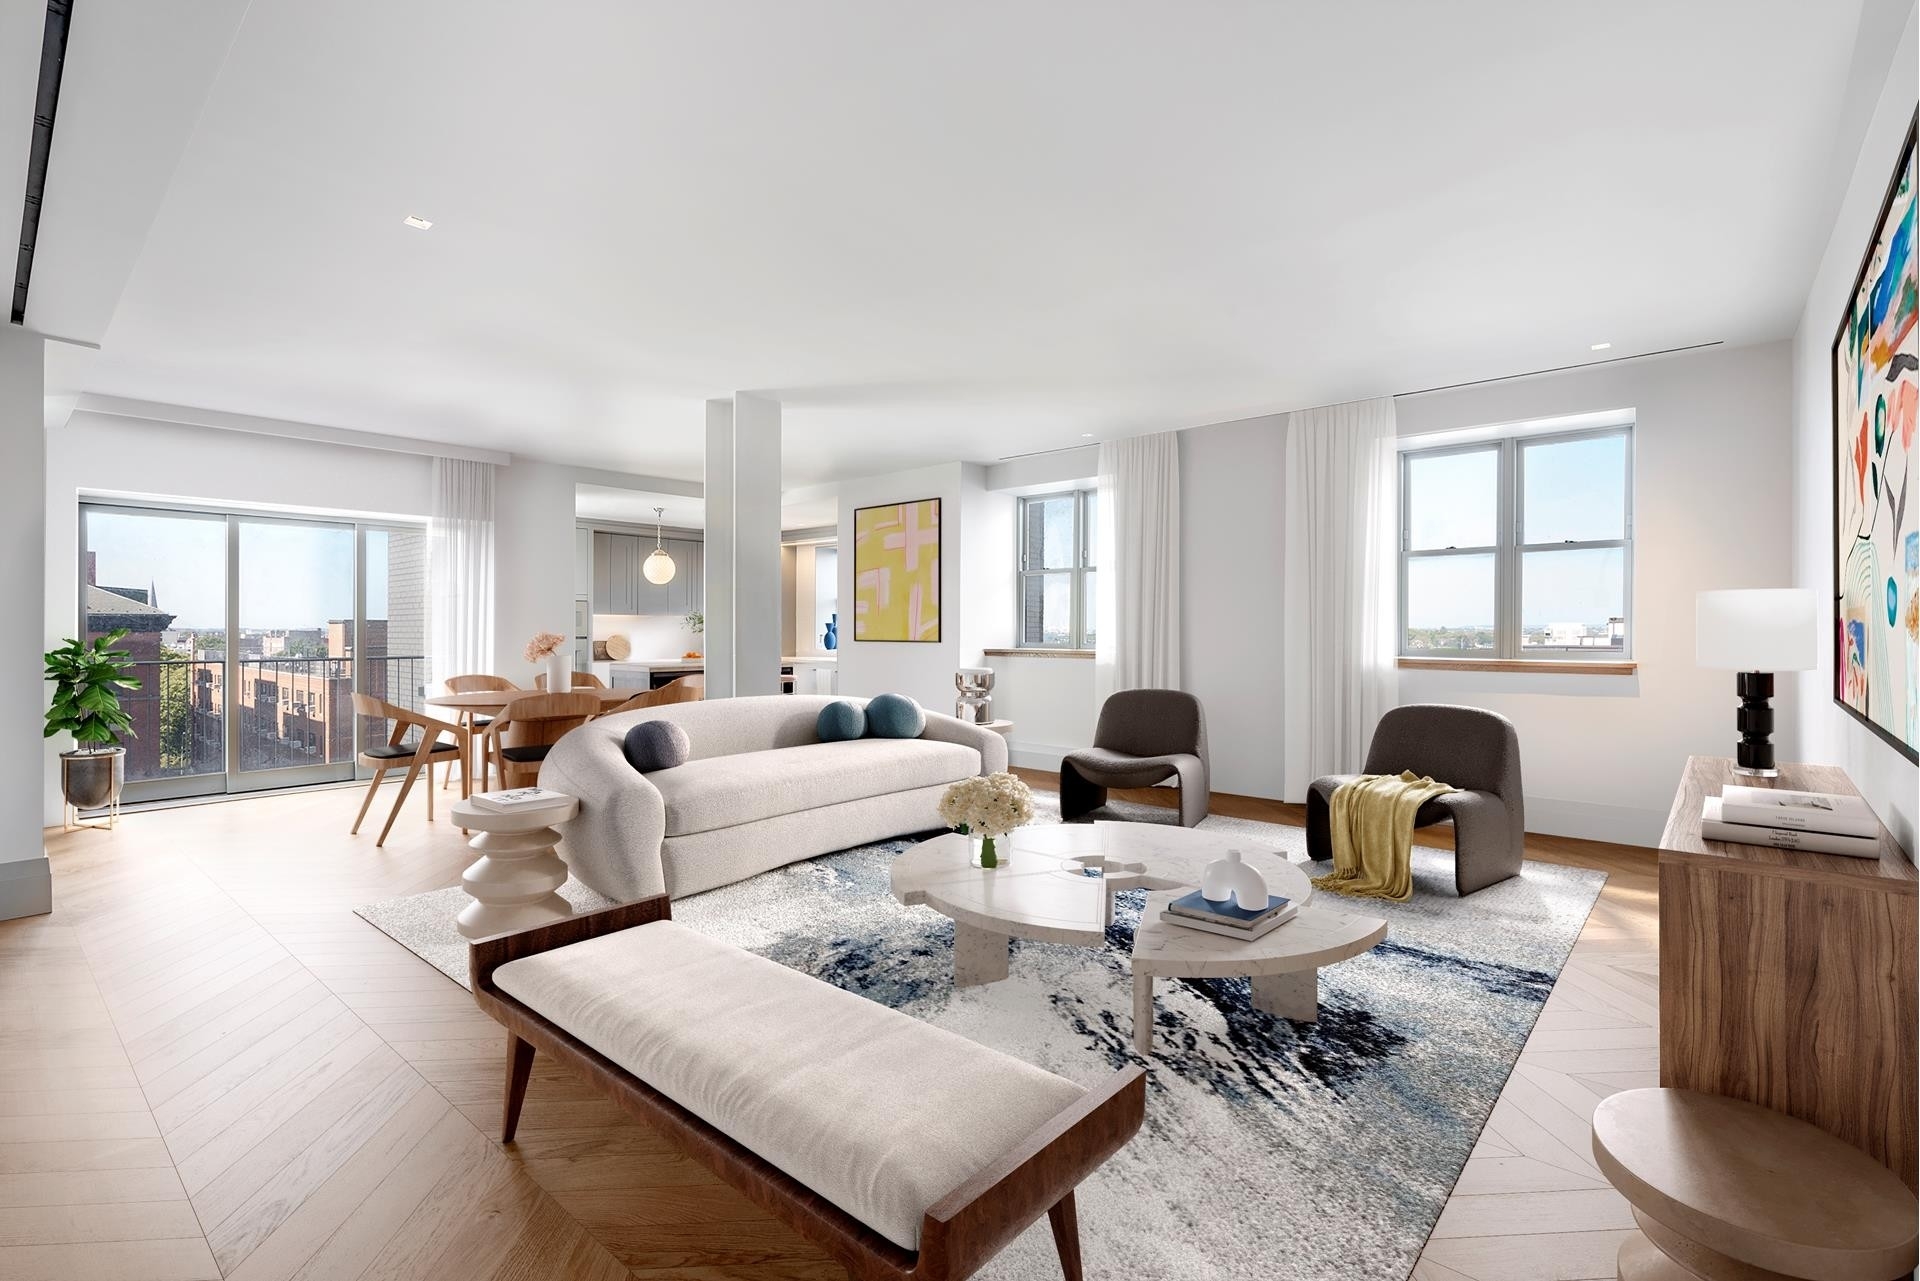 Condominium for Sale at Polhemus, 100 AMITY ST, 5A Cobble Hill, Brooklyn, NY 11201